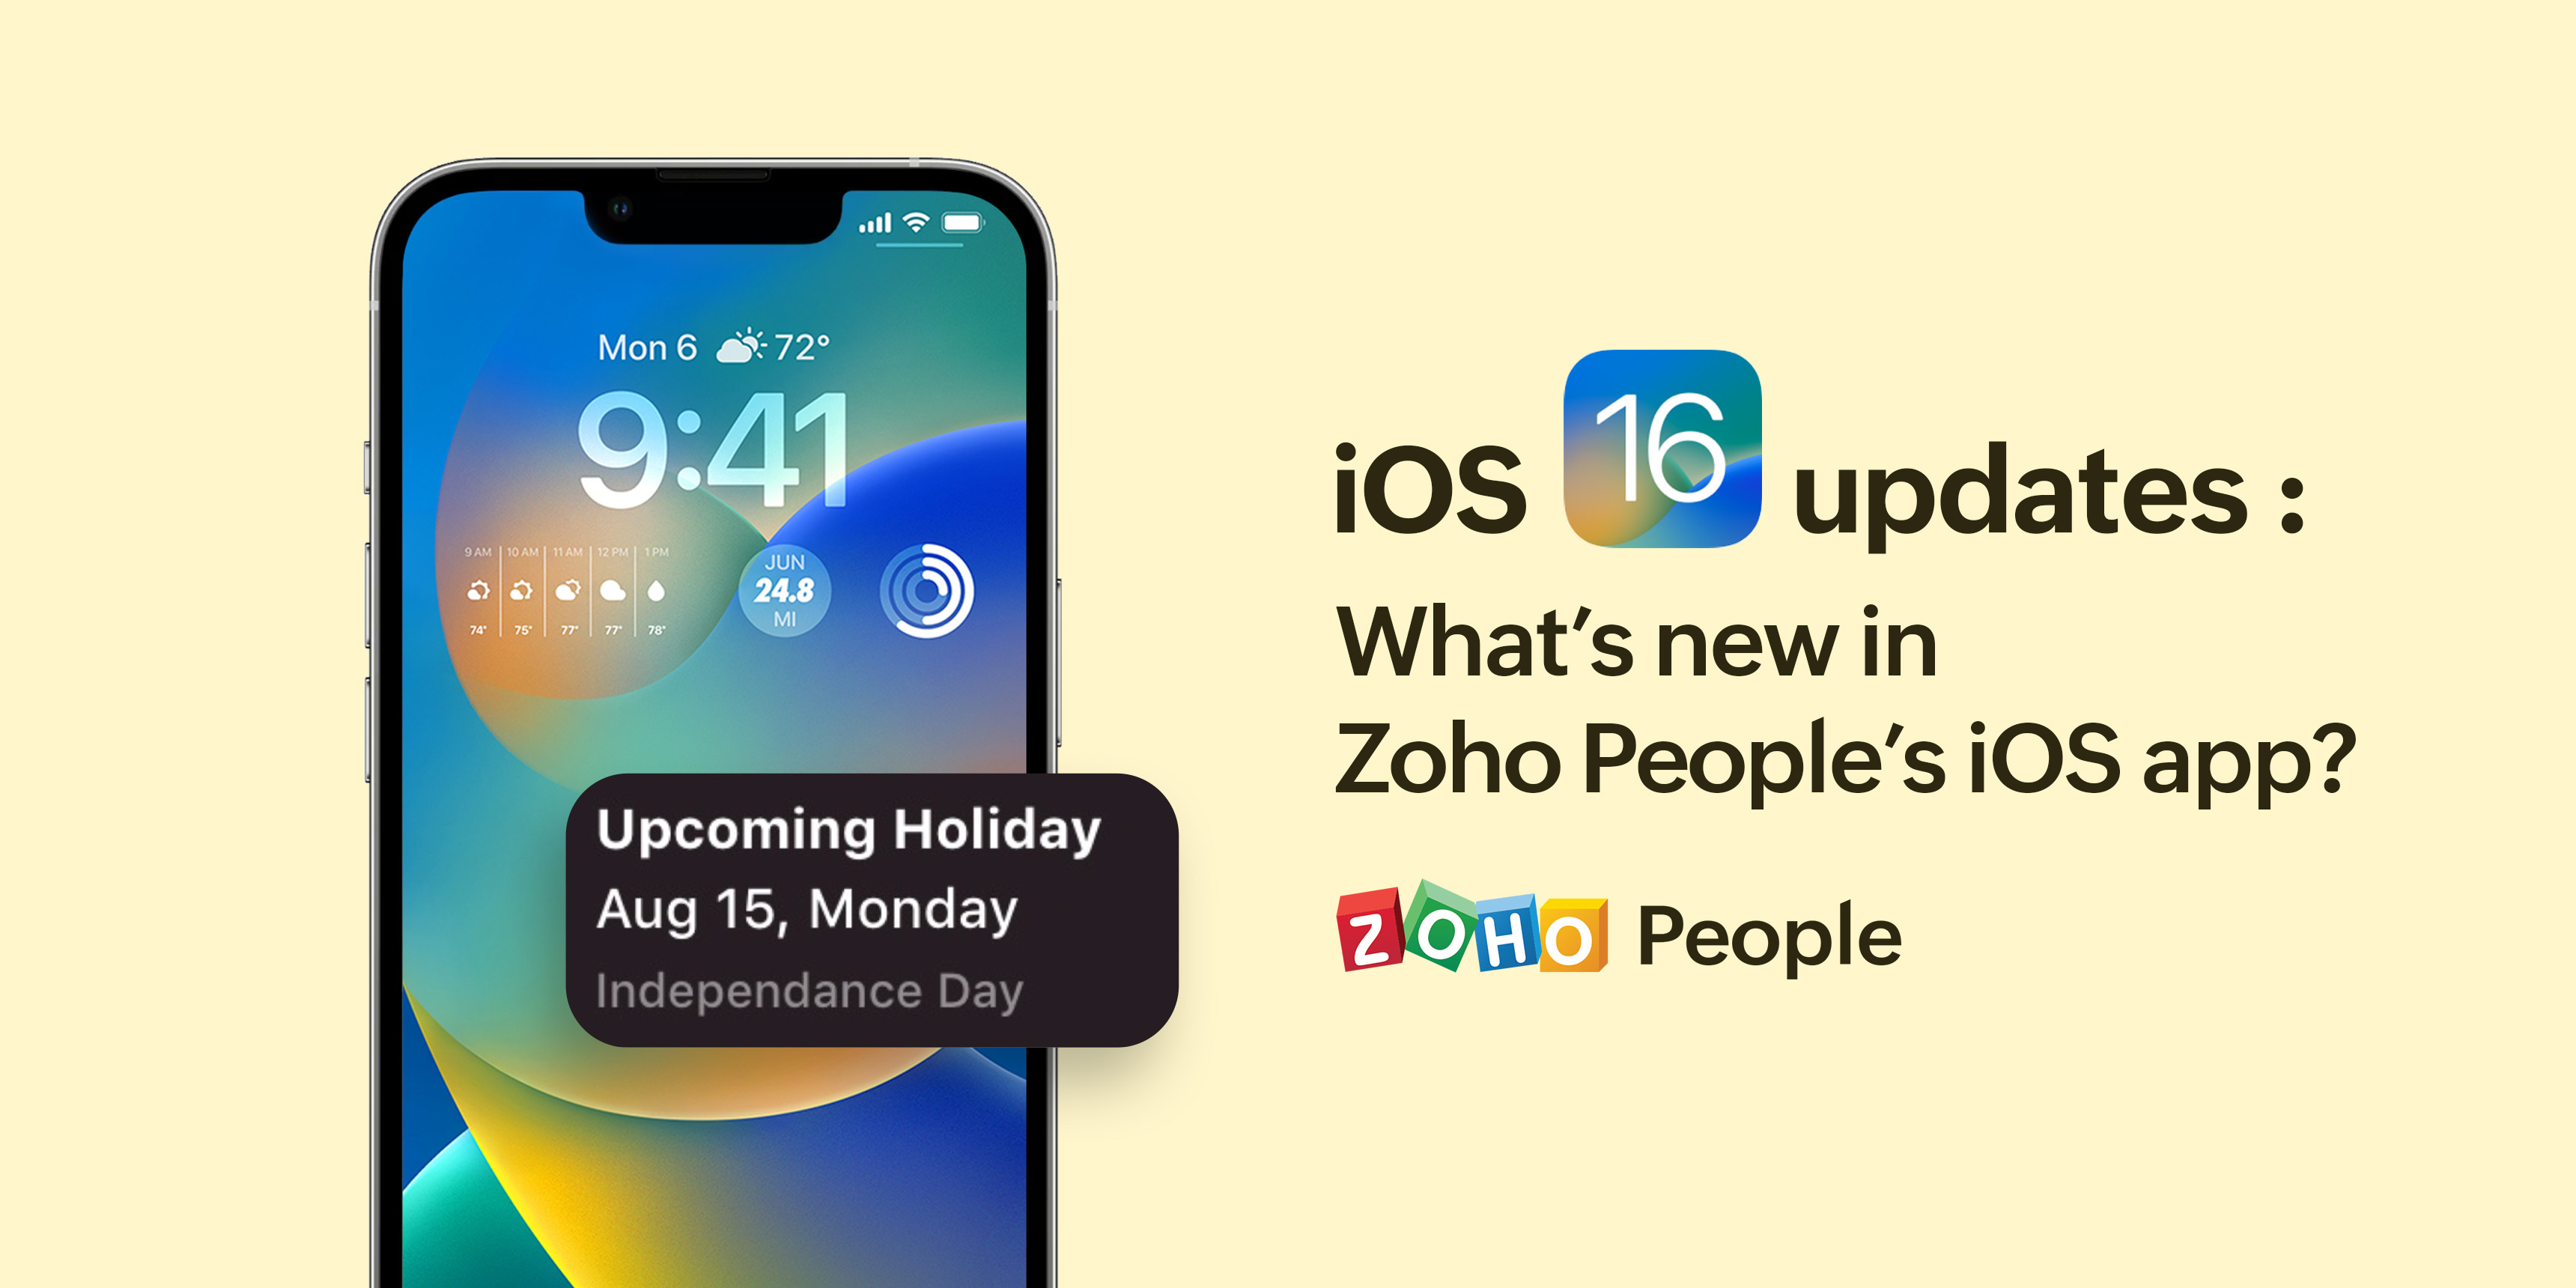 iOS 16 updates: What's new in Zoho People's iOS app?